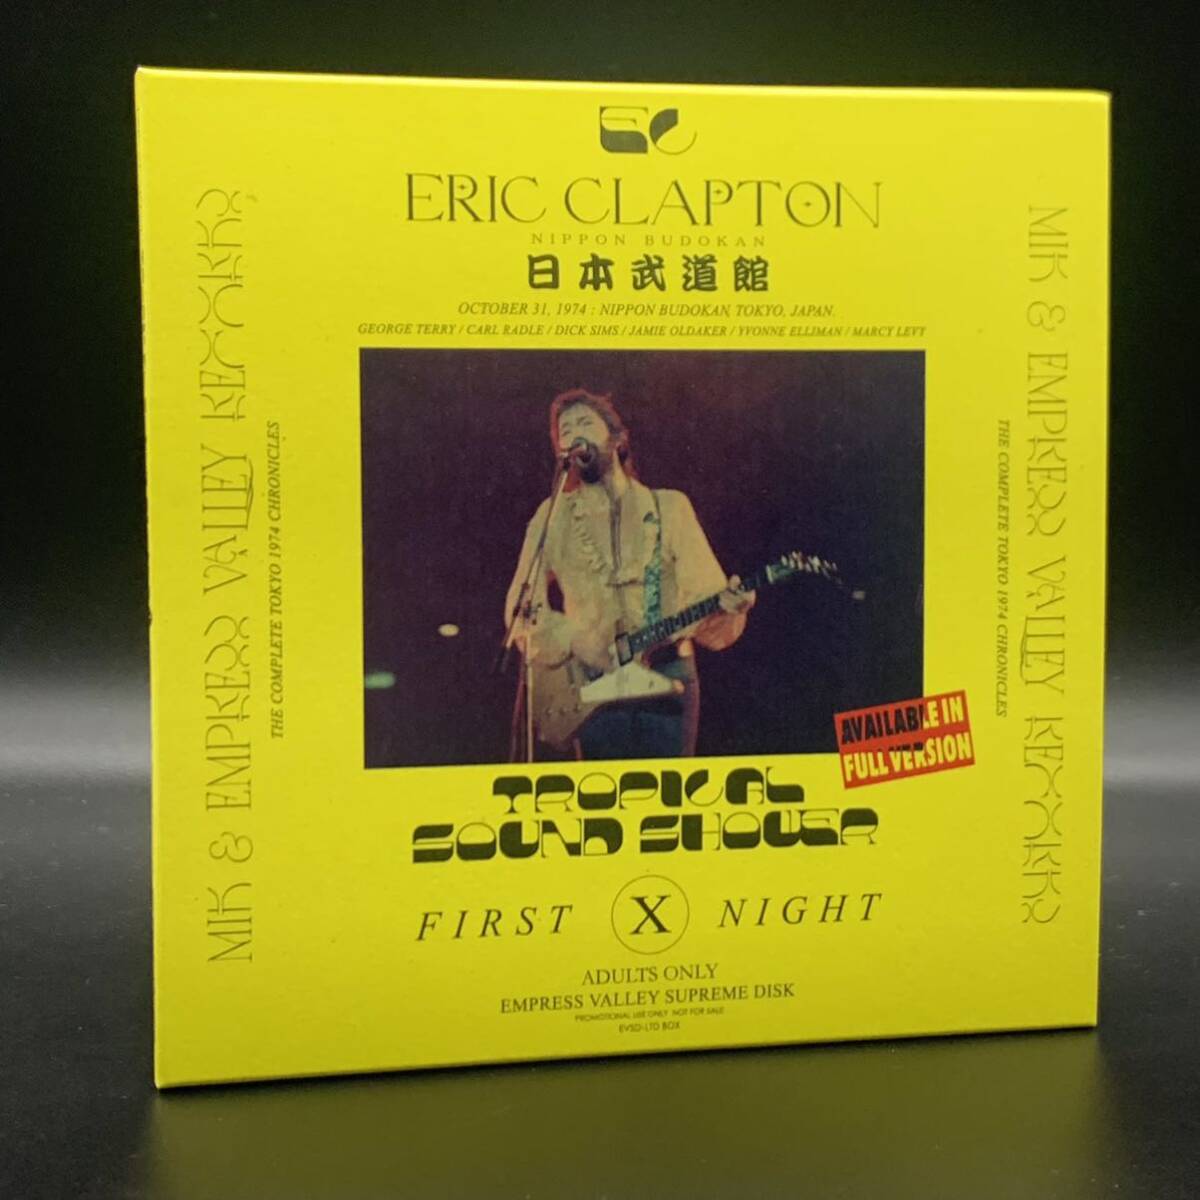 ERIC CLAPTON / TROPICAL SOUND SHOWER「亜熱帯武道館」(6CD BOX with Booklet) 初来日武道館3公演を全て初登場音源で収録した凄いやつ！の画像3